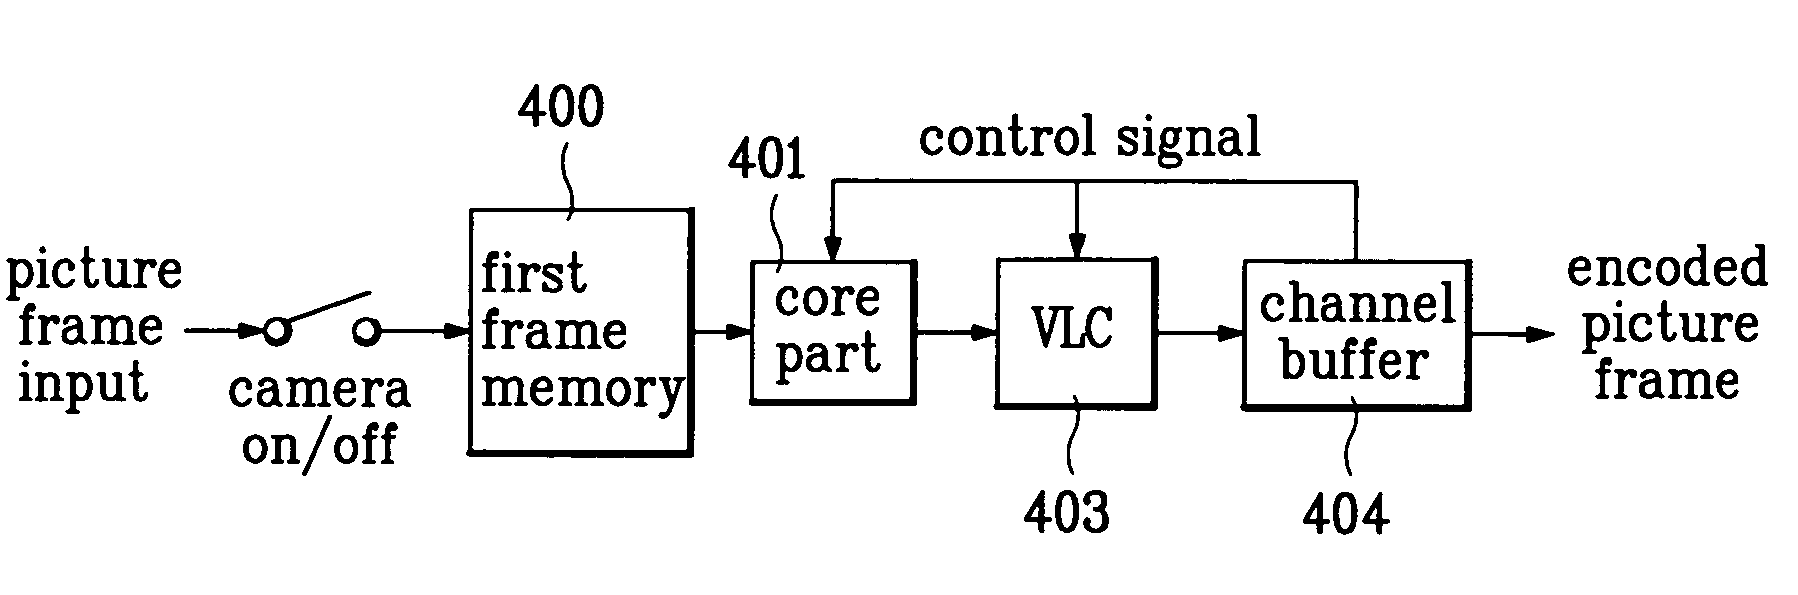 Terminal and method for transporting still picture